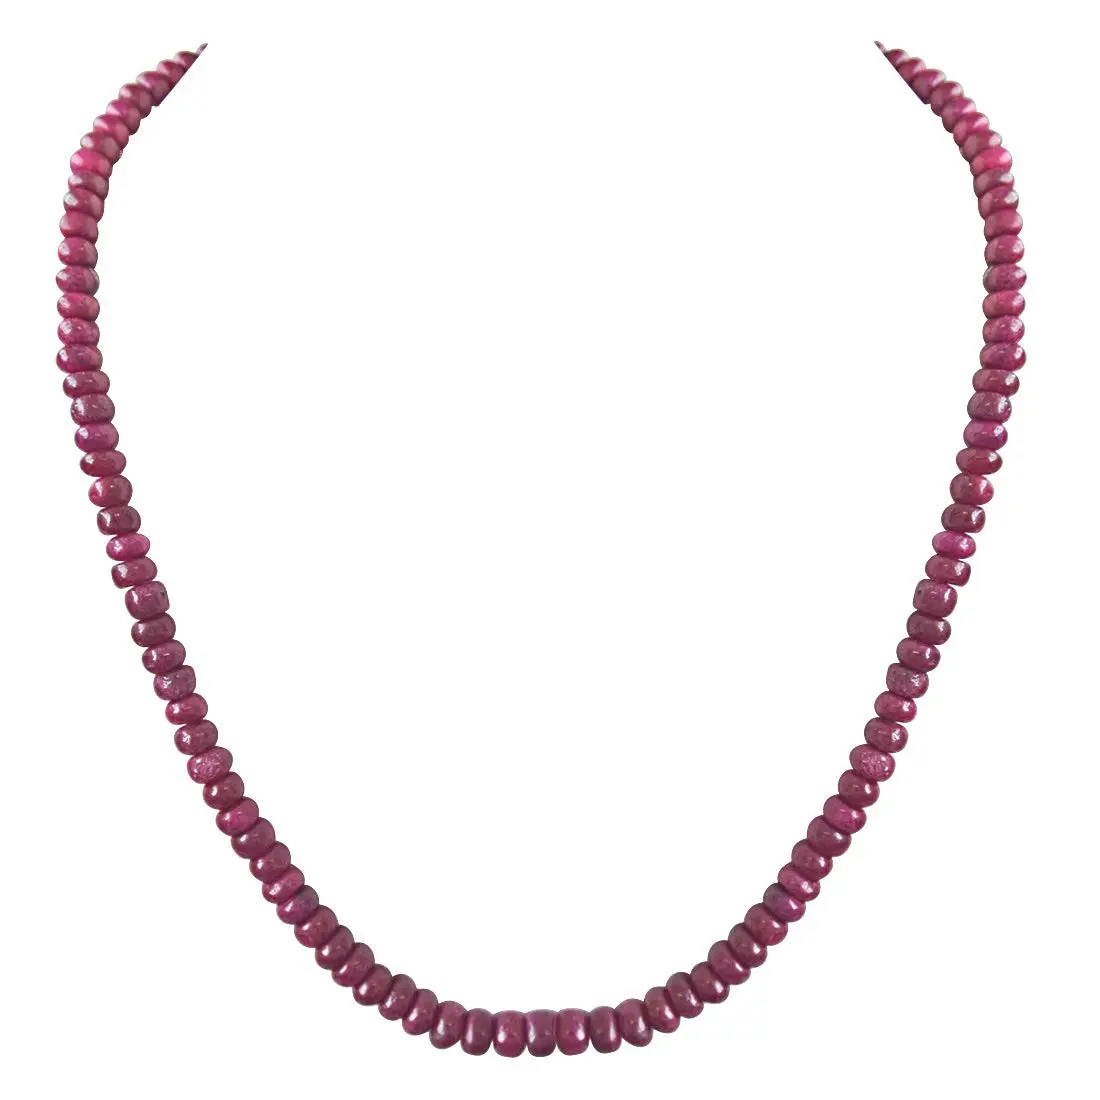 110cts Single Line Real Light Pink Ruby Beads Necklace for Women (110ctsRubyNeck)